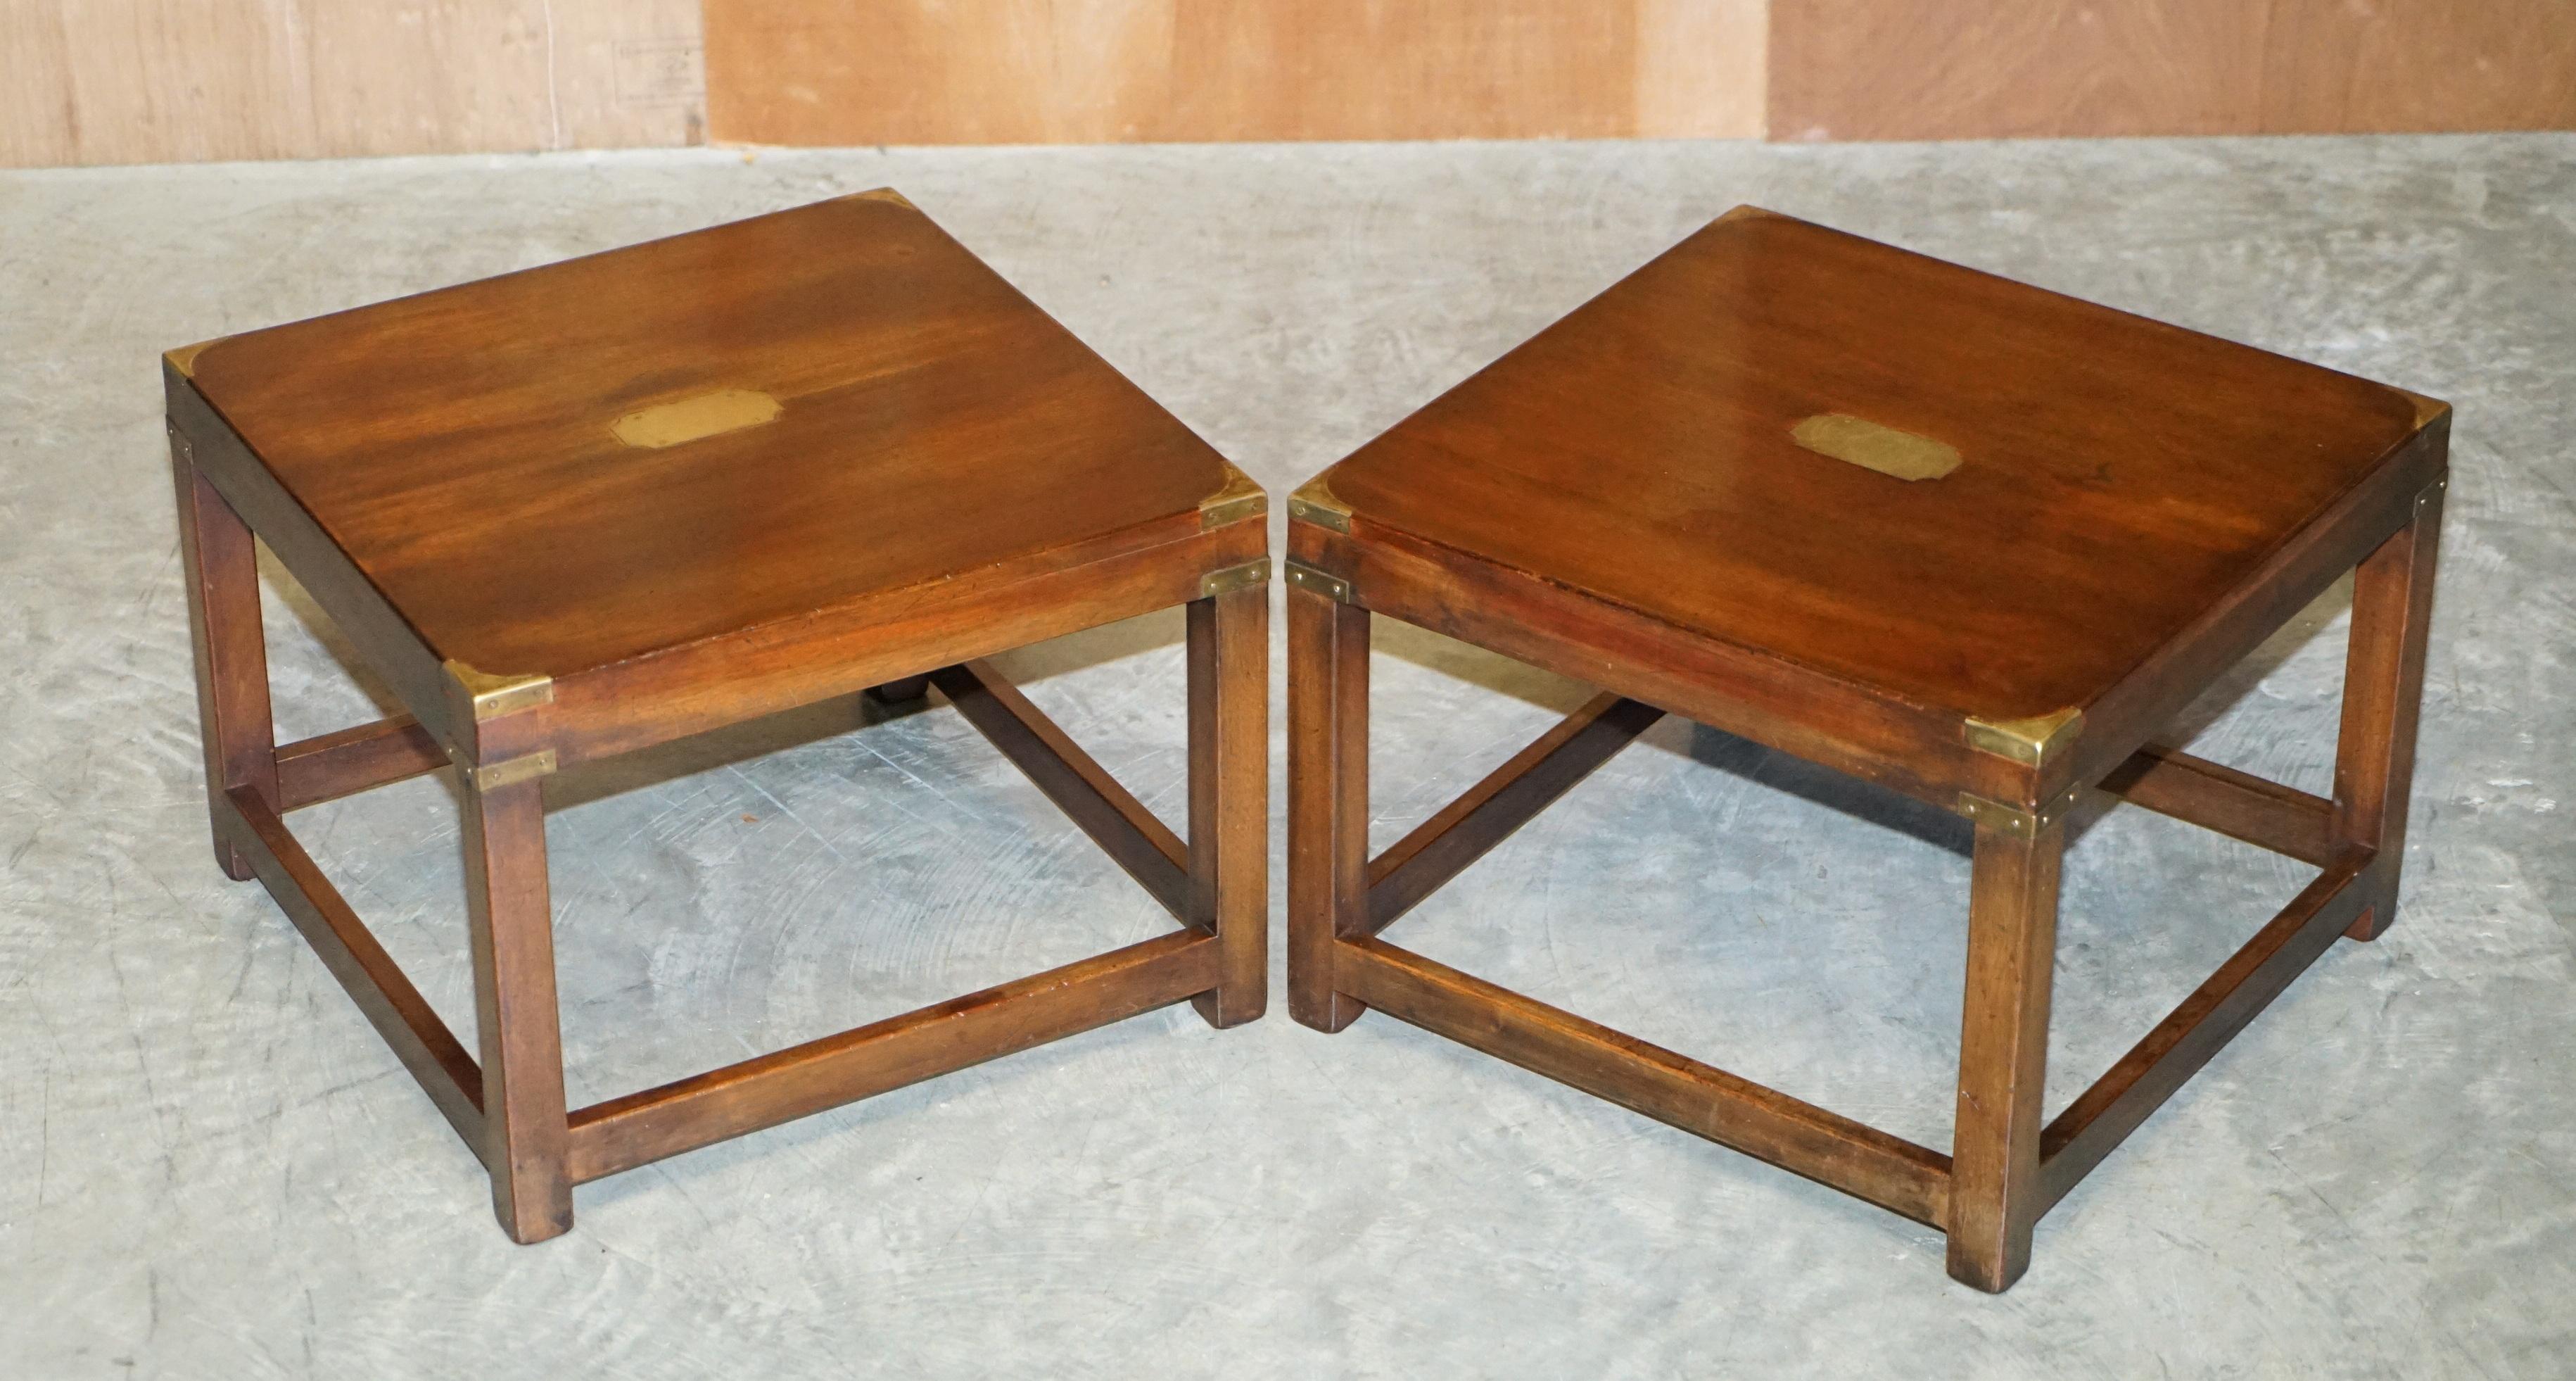 We are delighted to offer this stunning pair of Kennedy furniture Harrods London Military Campaign side tables.

A good looking and well-made pair, these are absolutely iconic and highly collectable. 

These have been cleaned waxed and polished